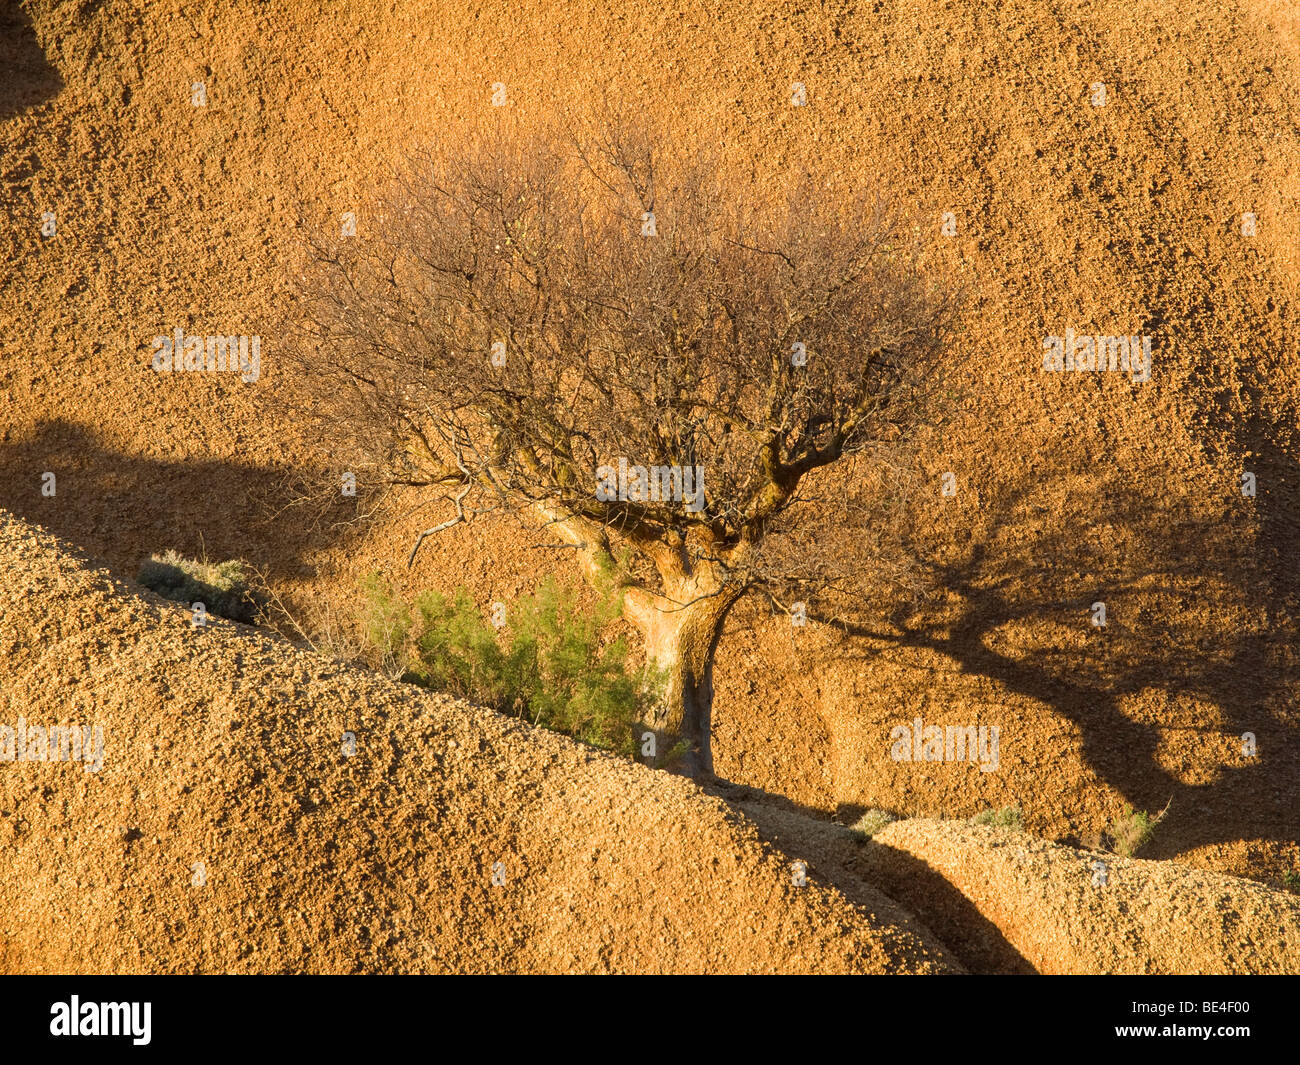 Butter tree or Cobas tree (Cyphostemma curroii) at the Spitzkoppe mountain, Namibia, Africa Stock Photo